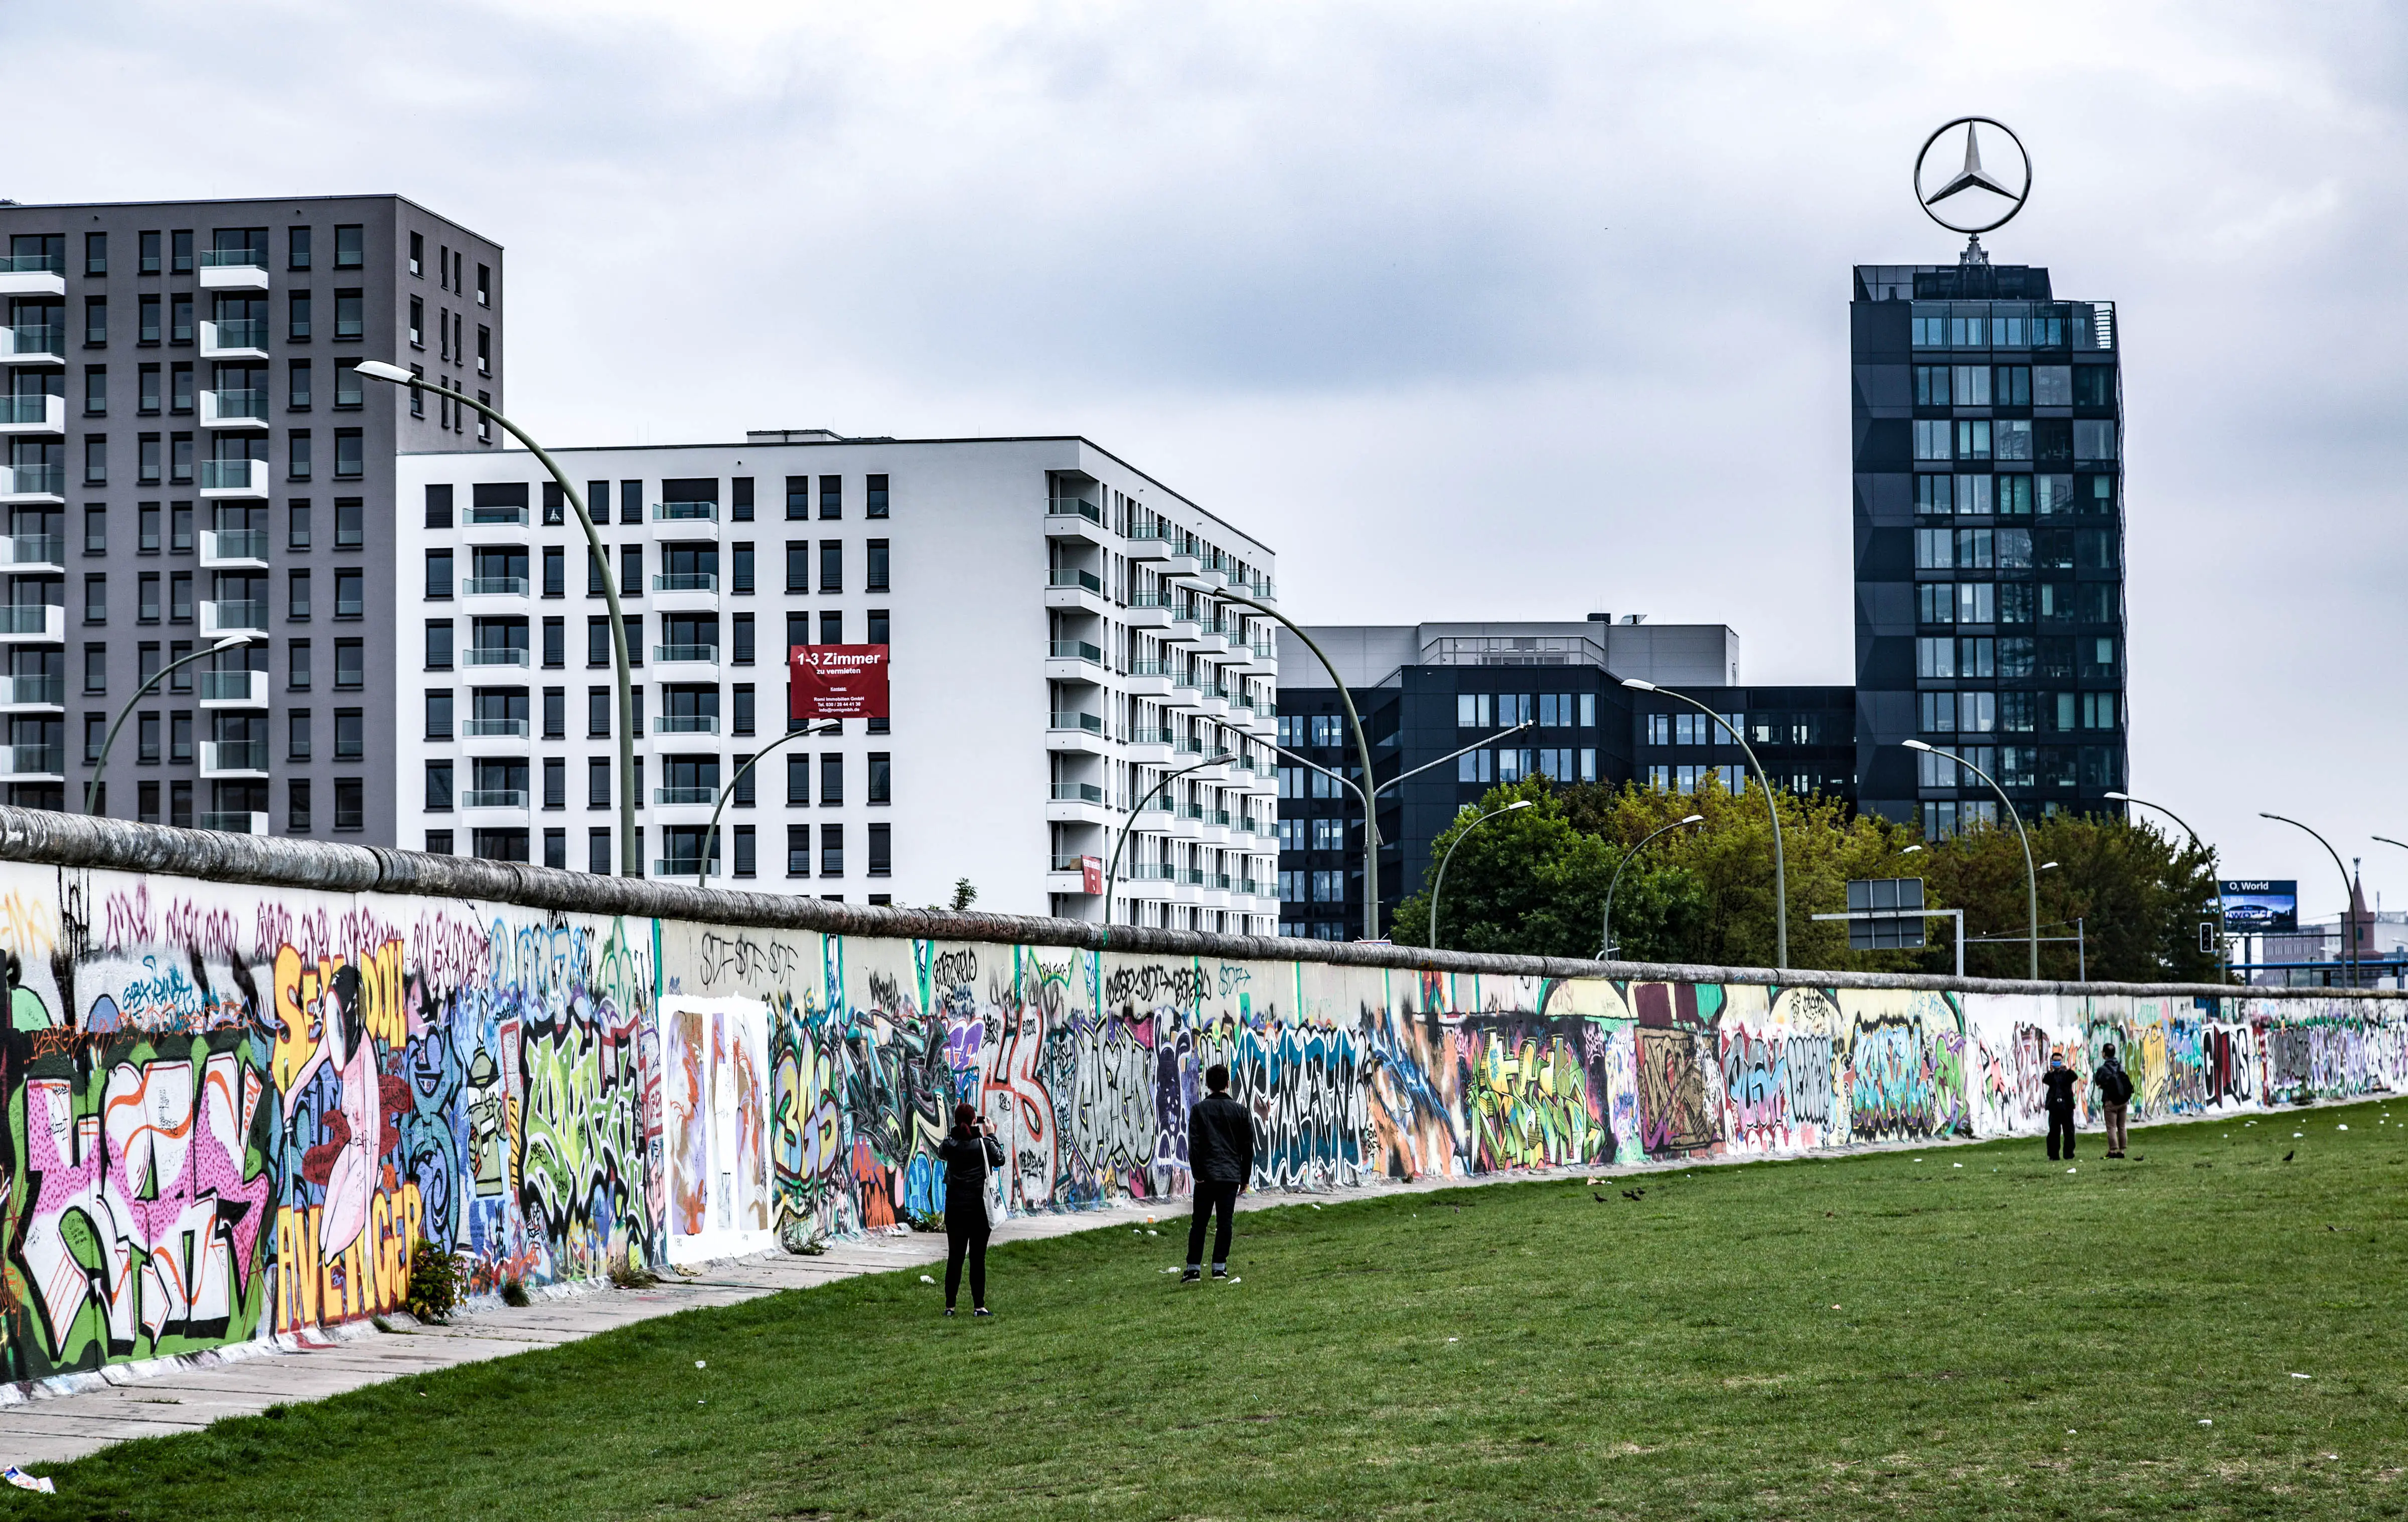 berlin wall tour cost